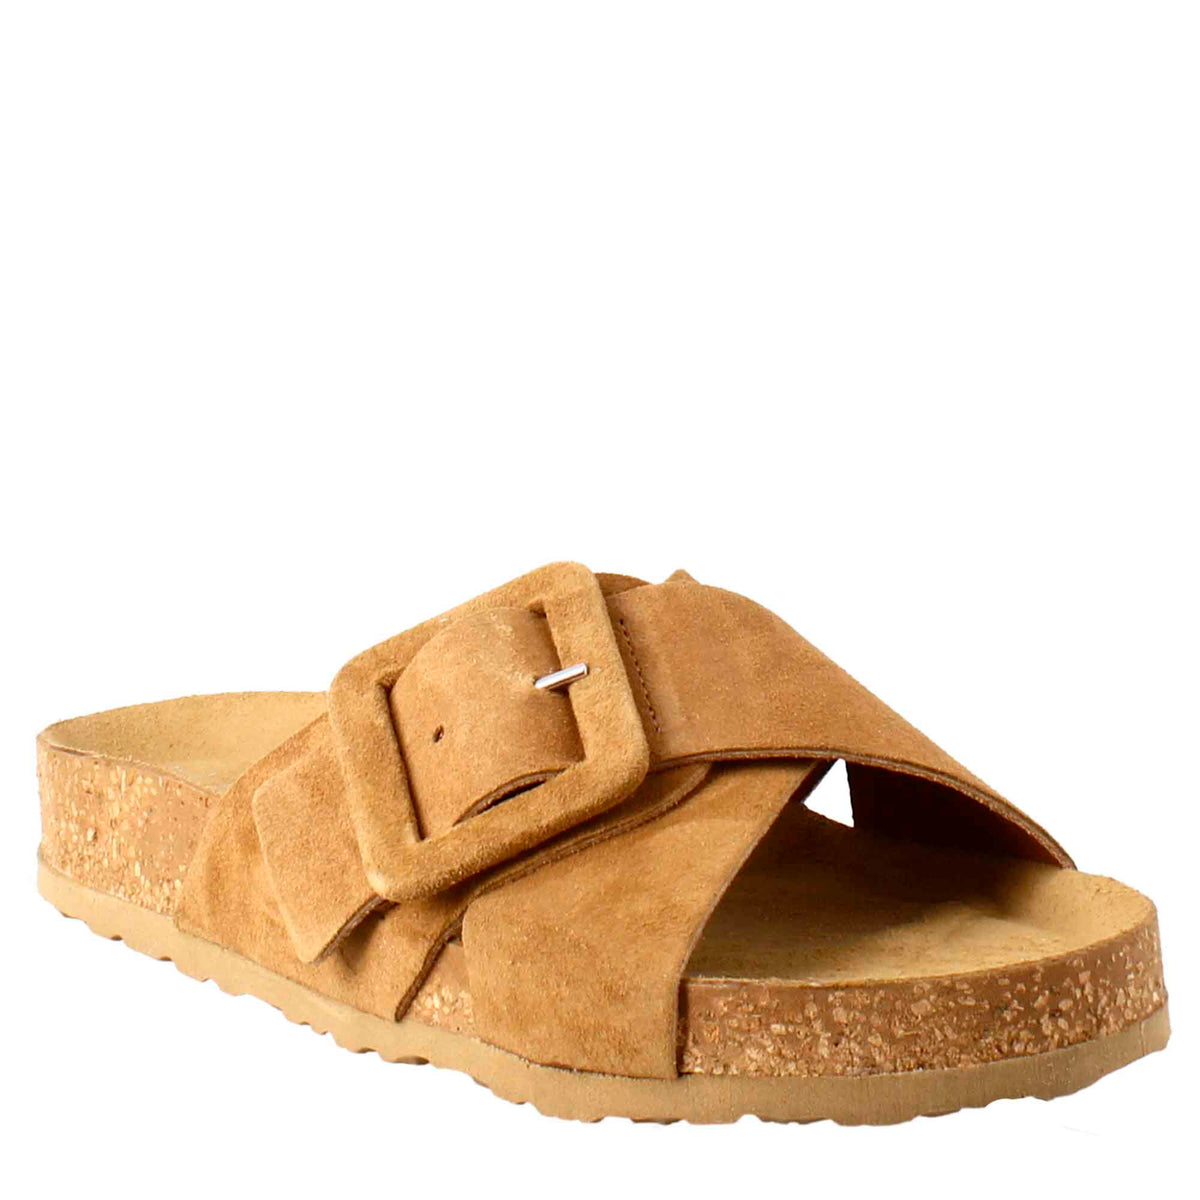 Woman's double band sandal and buckle in brown suede